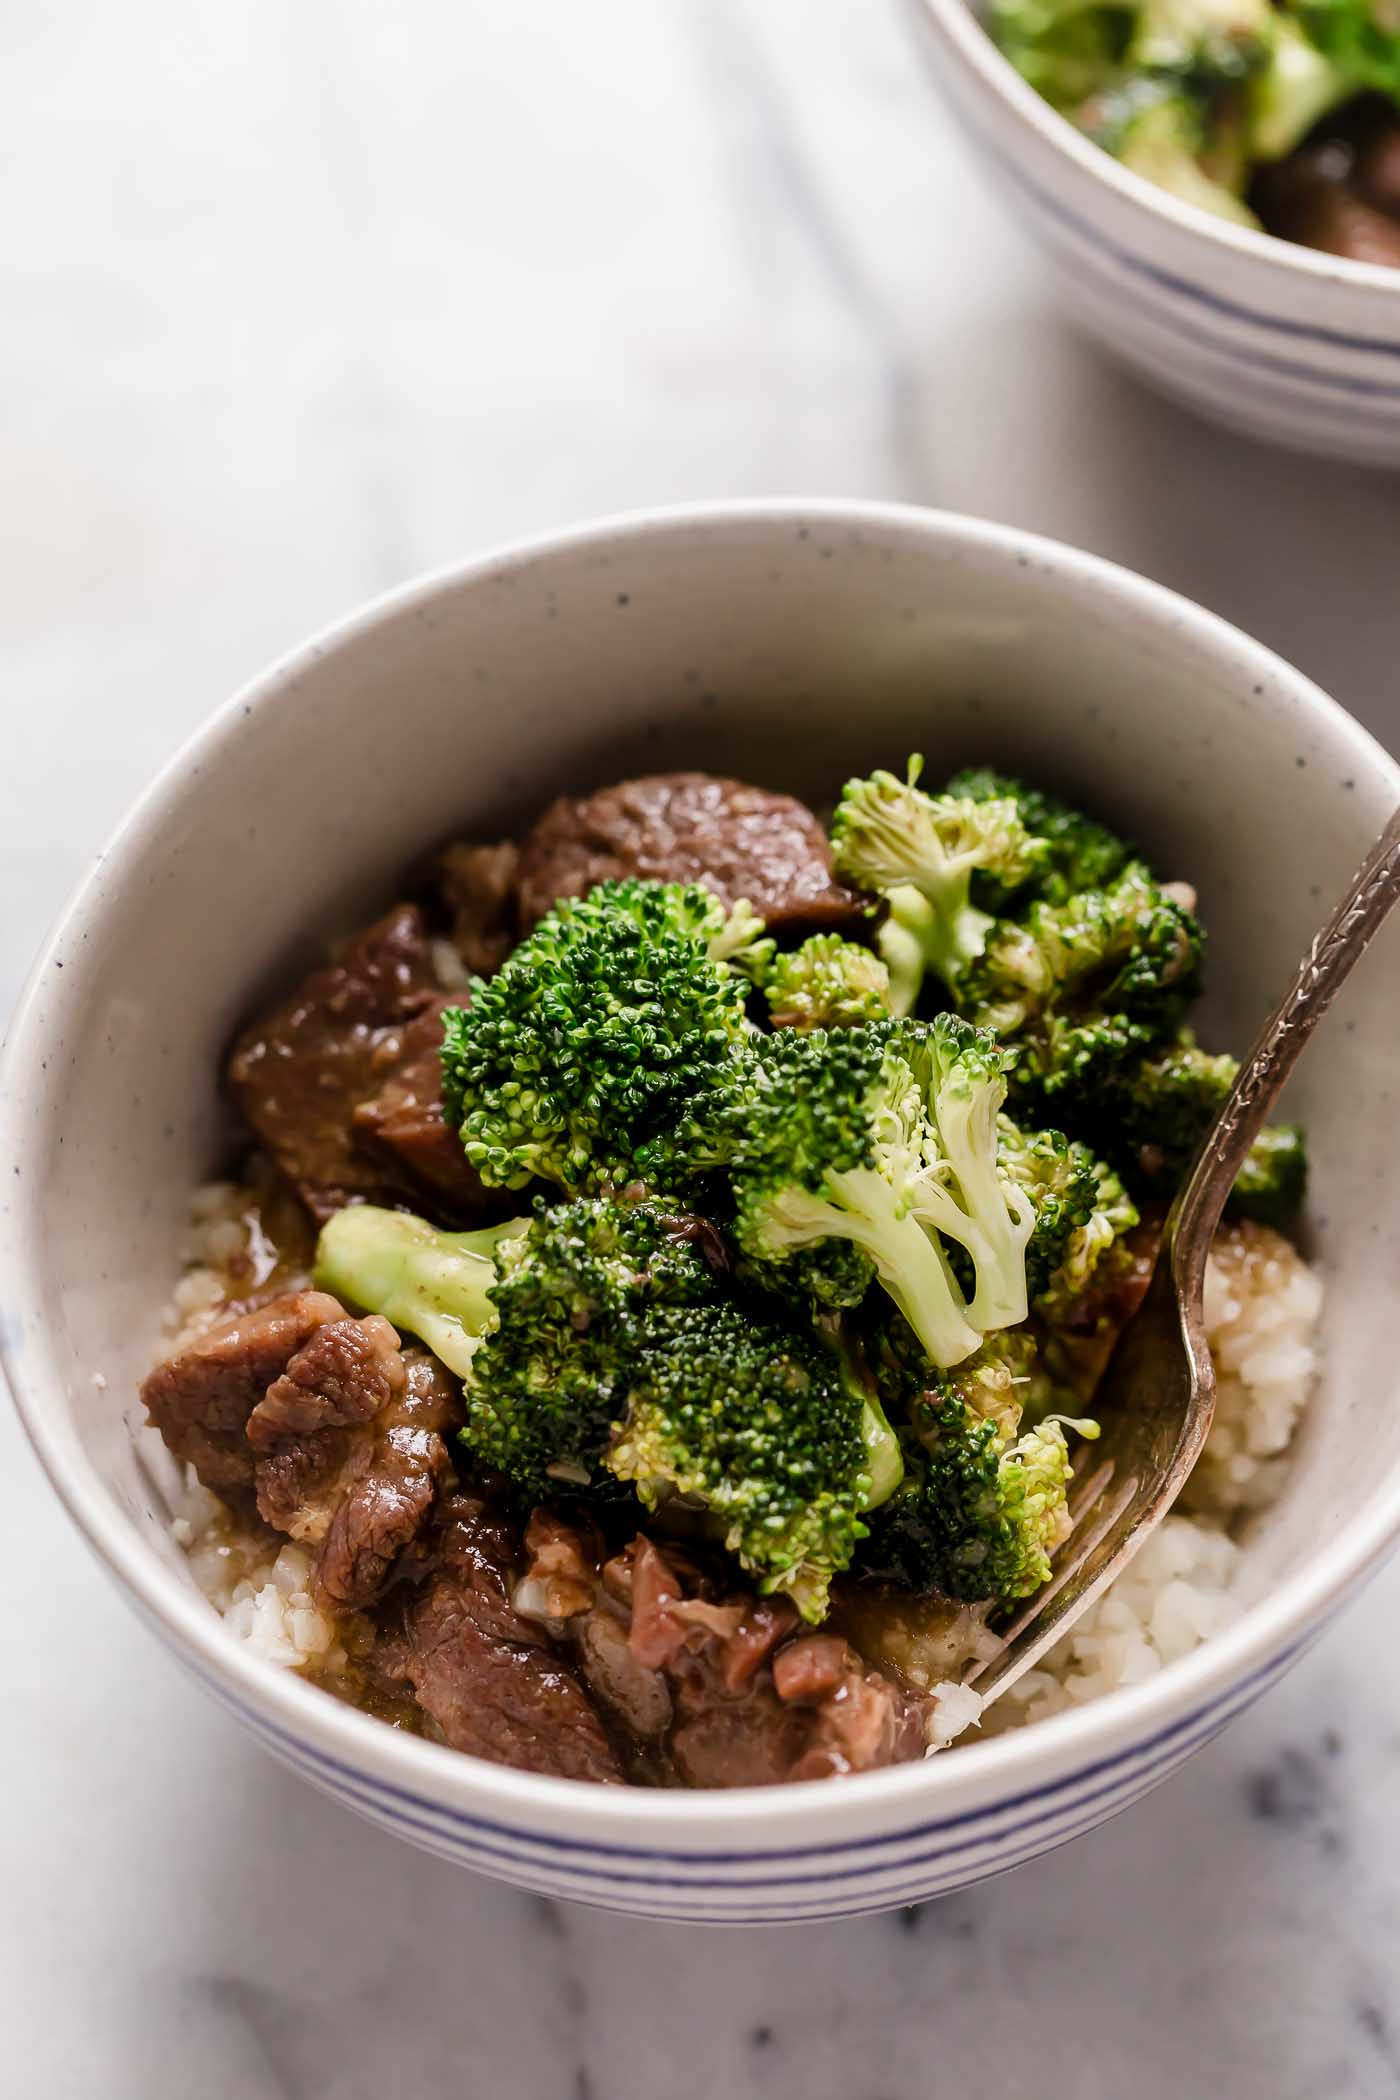 https://realbalanced.com/wp-content/uploads/2018/10/instant-pot-beef-broccoli-in-a-bowl-on-top-of-a-marble-counter.jpg